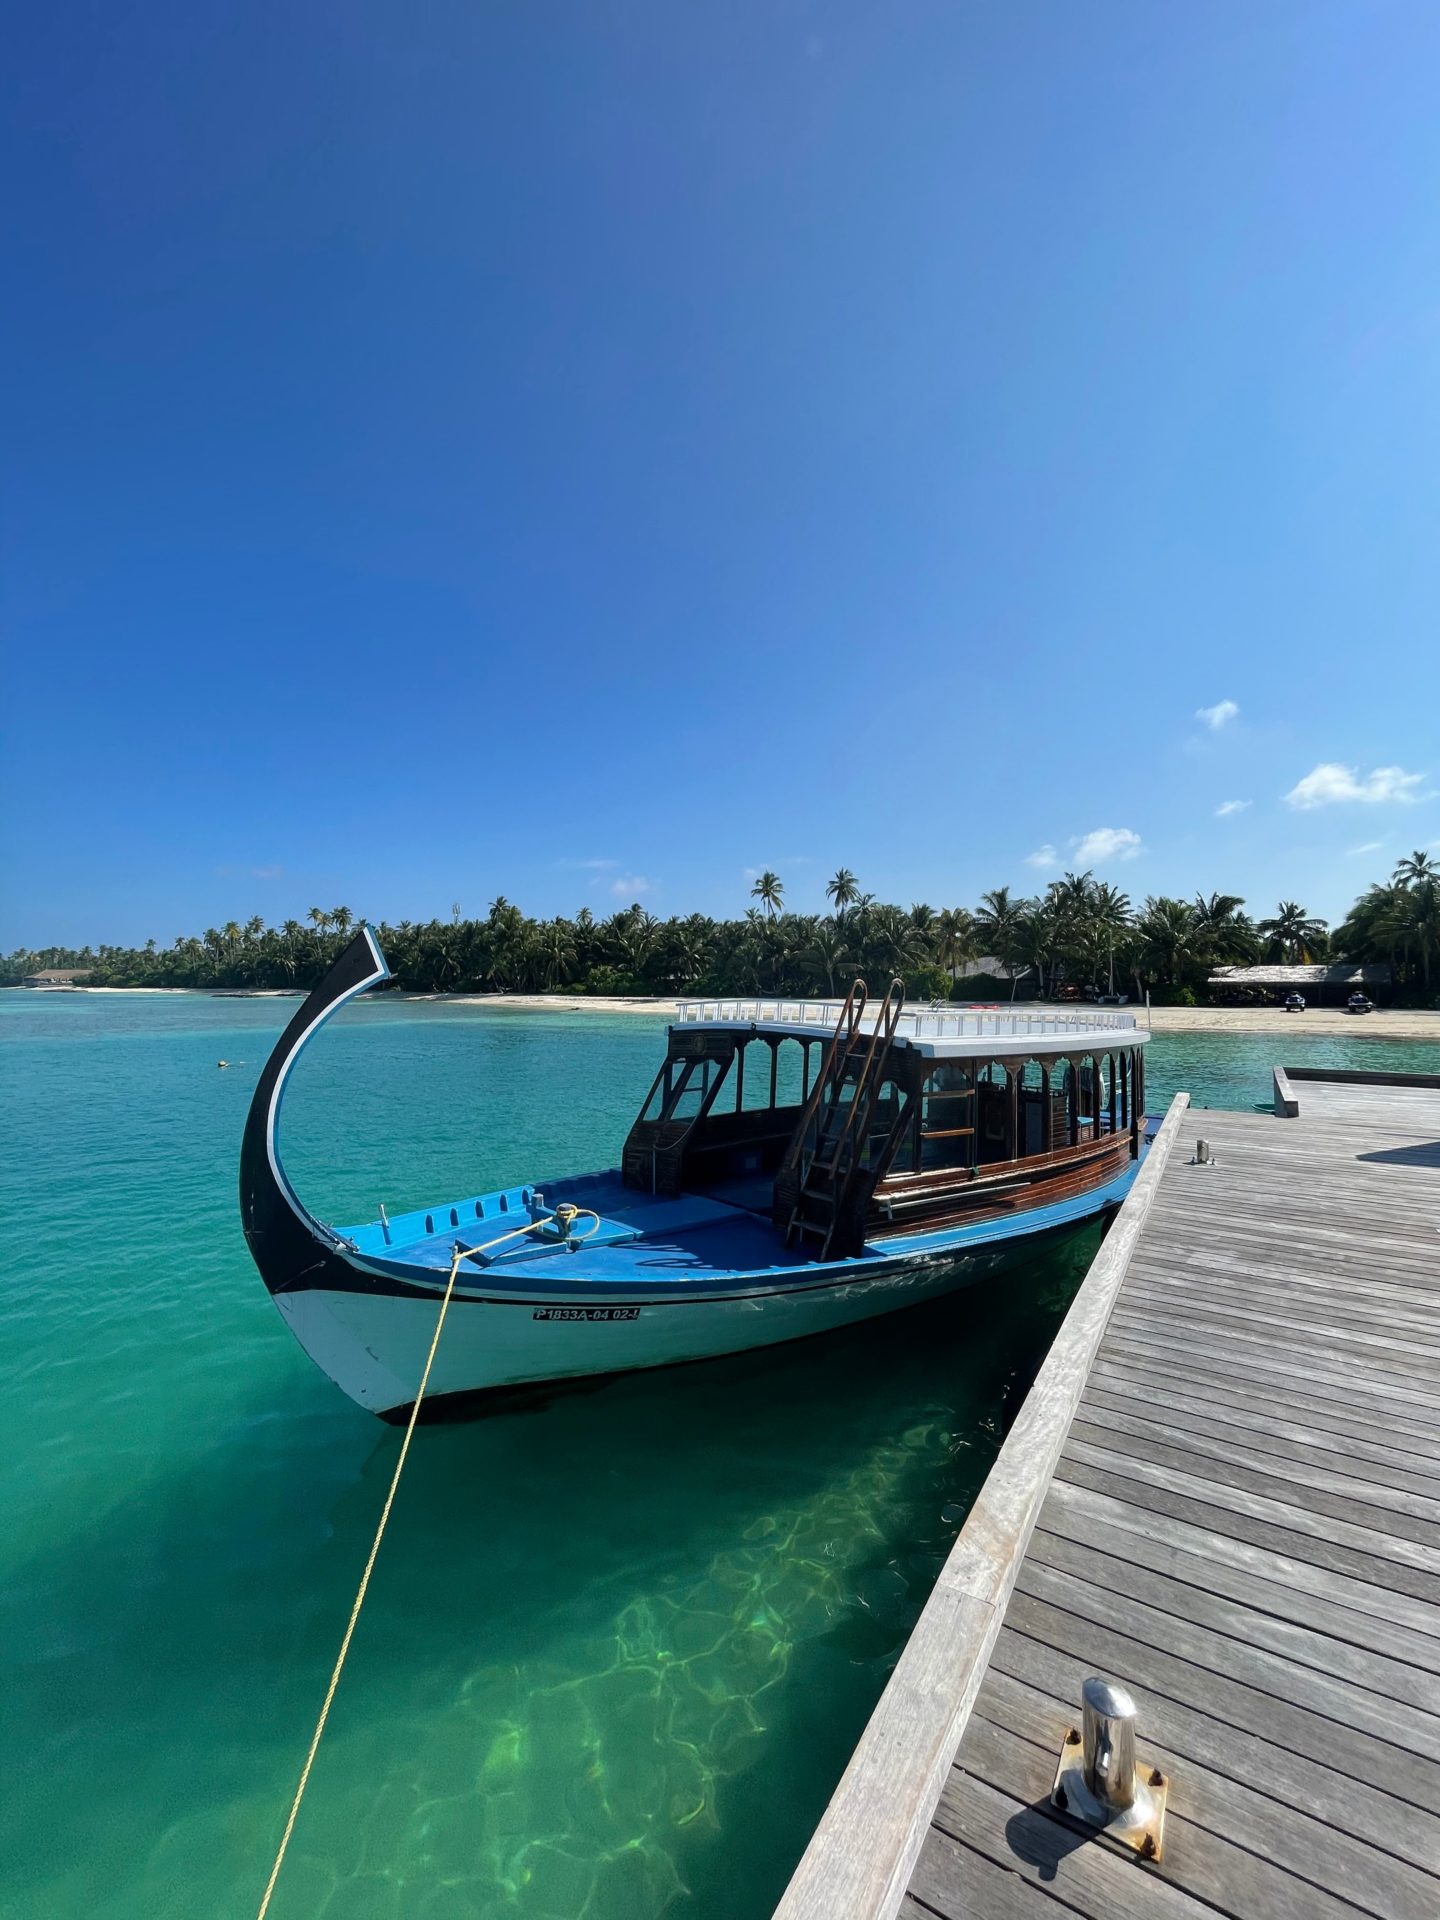 A boat docked next to a jetty in the Maldives